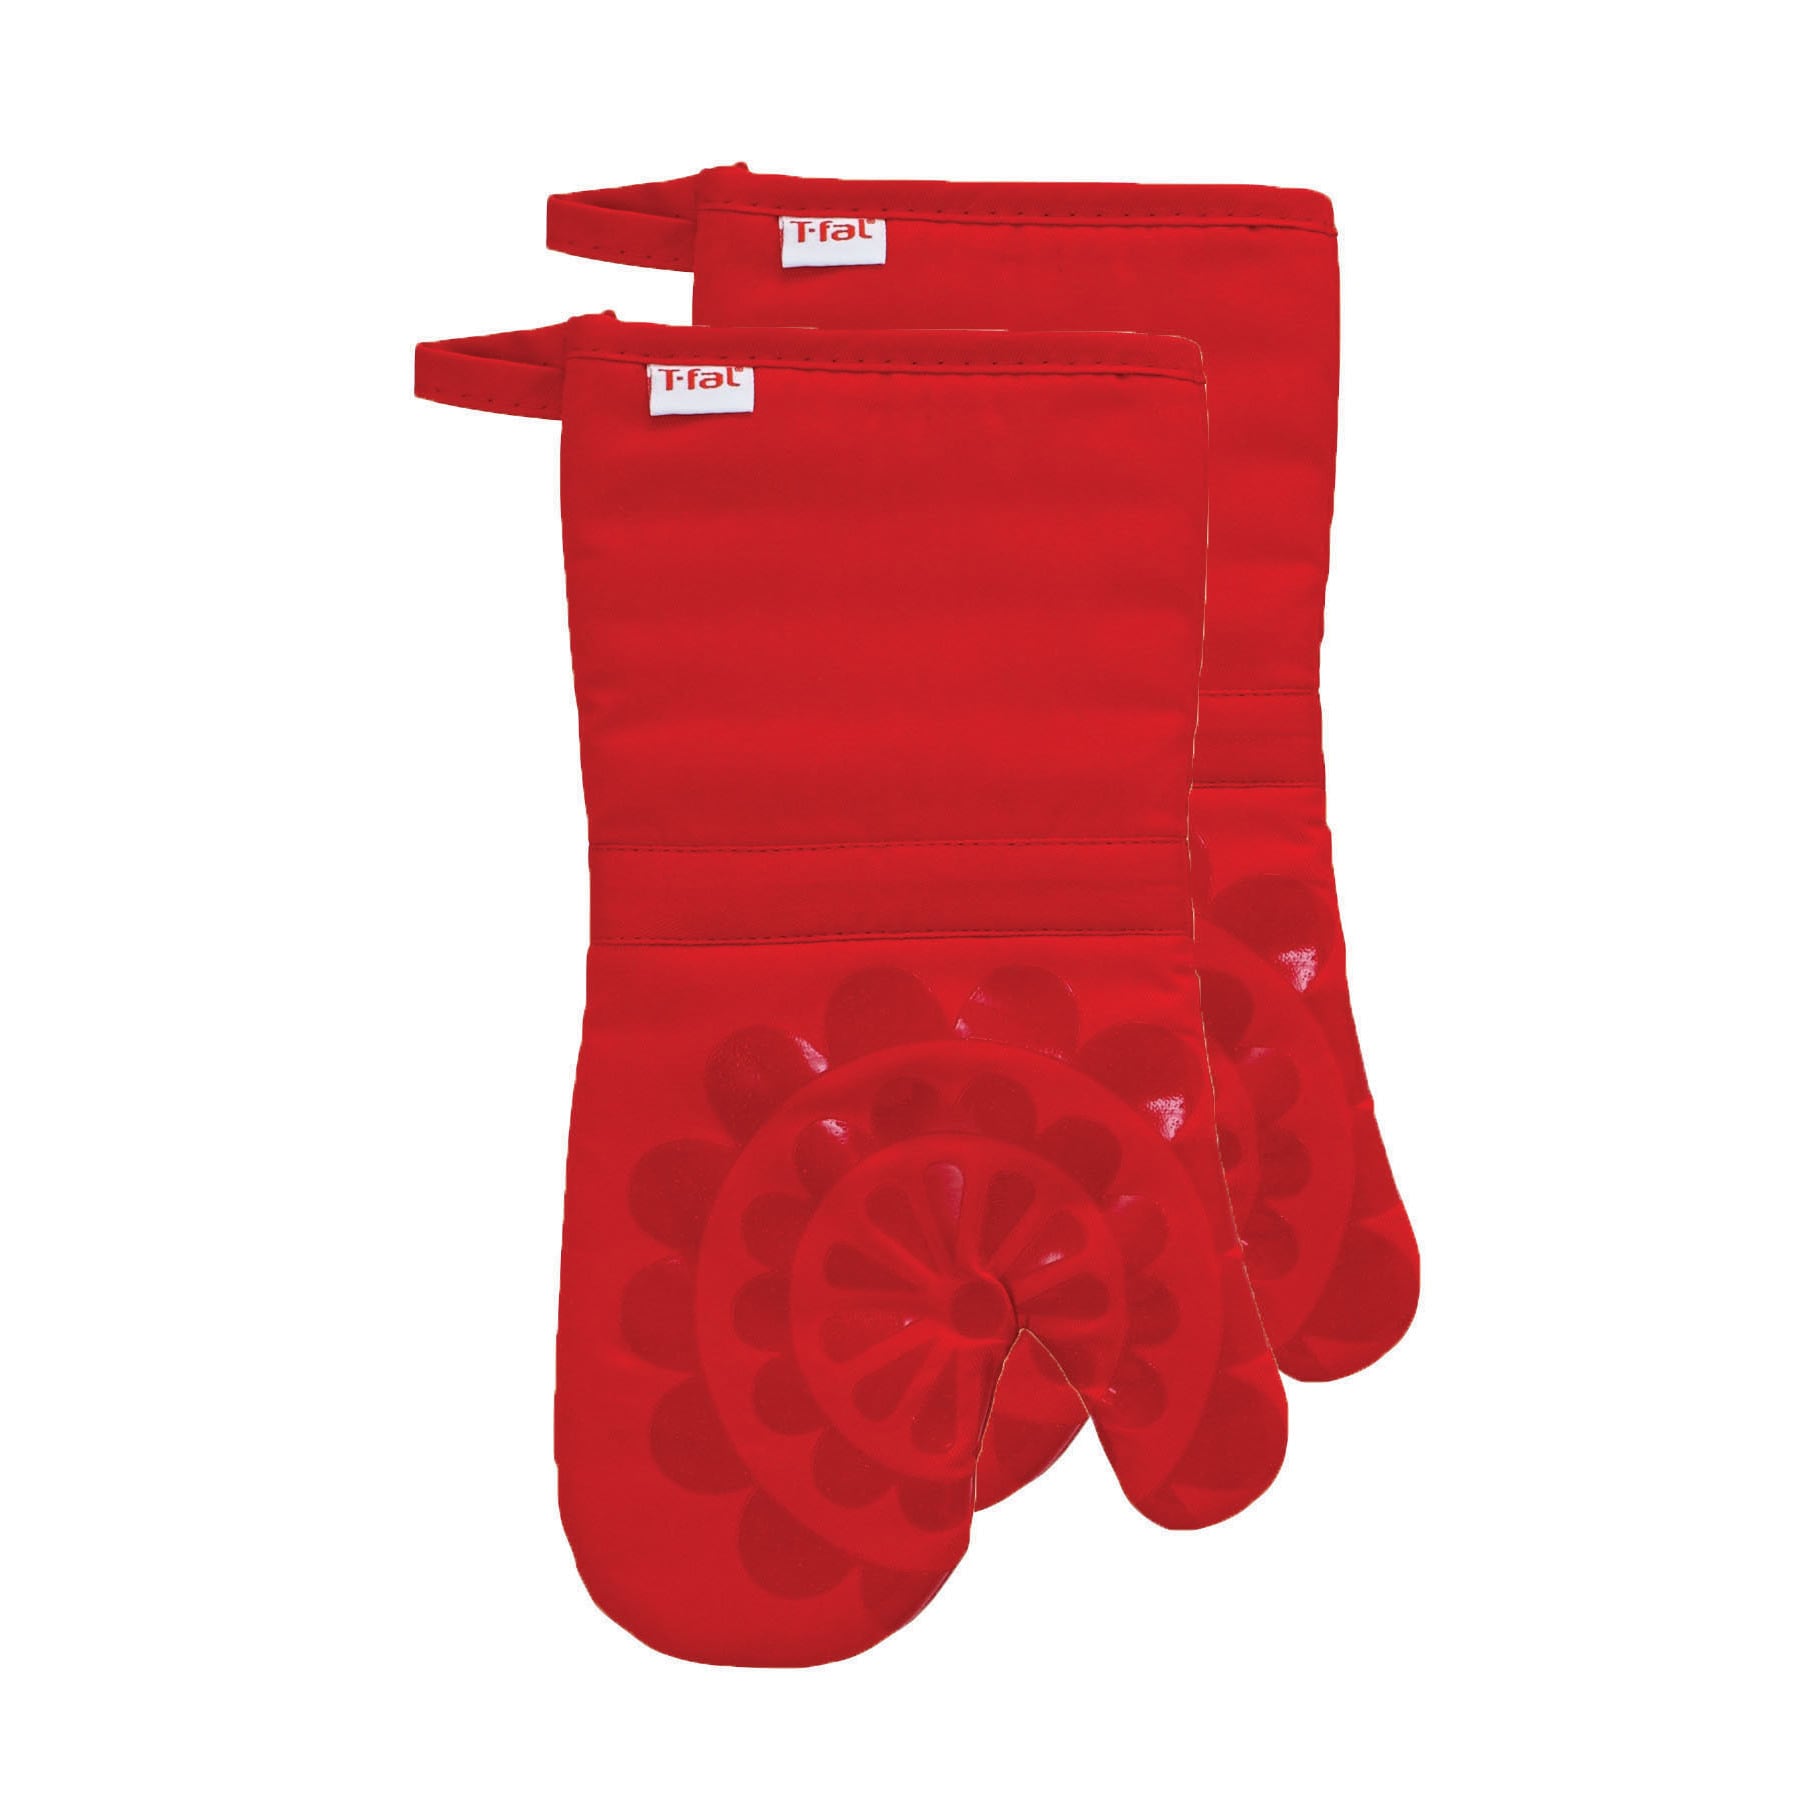 https://ak1.ostkcdn.com/images/products/15872032/T-fal-Textiles-2-Pack-Print-Silicone-Medallion-Cotton-Twill-Oven-Mitt-Set-1d453162-2736-4f16-a09f-8cd35d9be29f.jpg